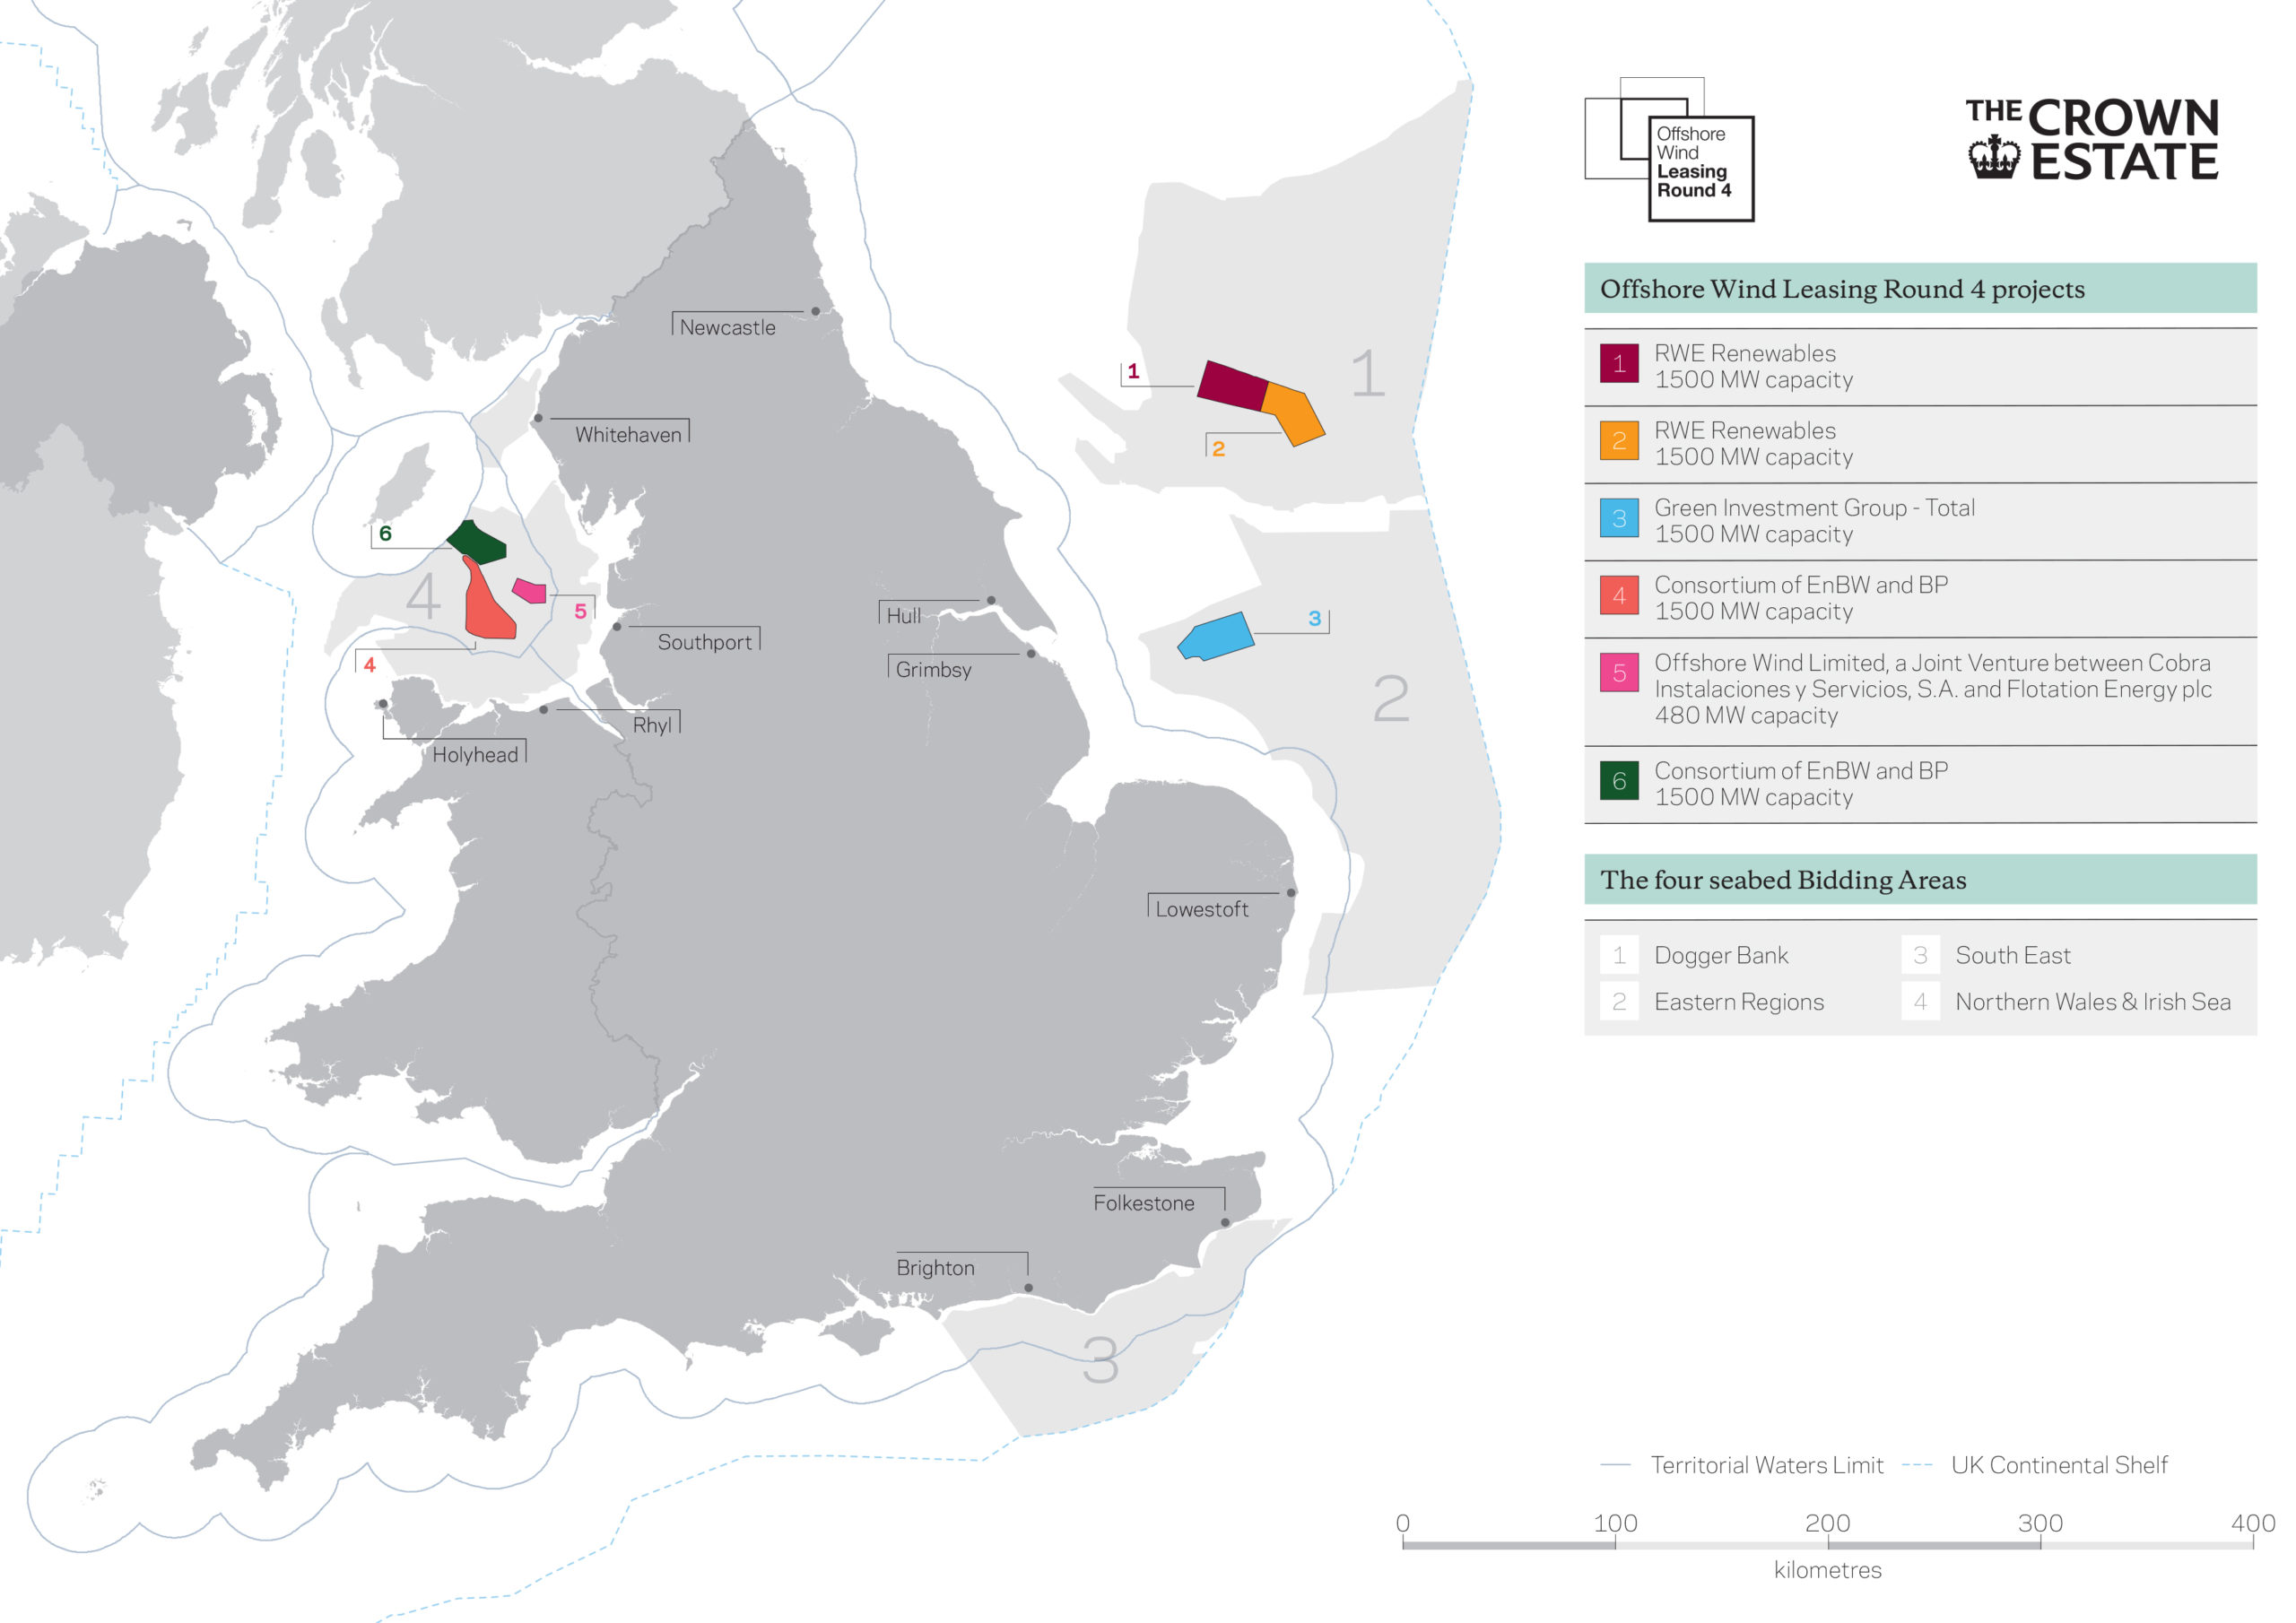 Offshore Wind Leasing